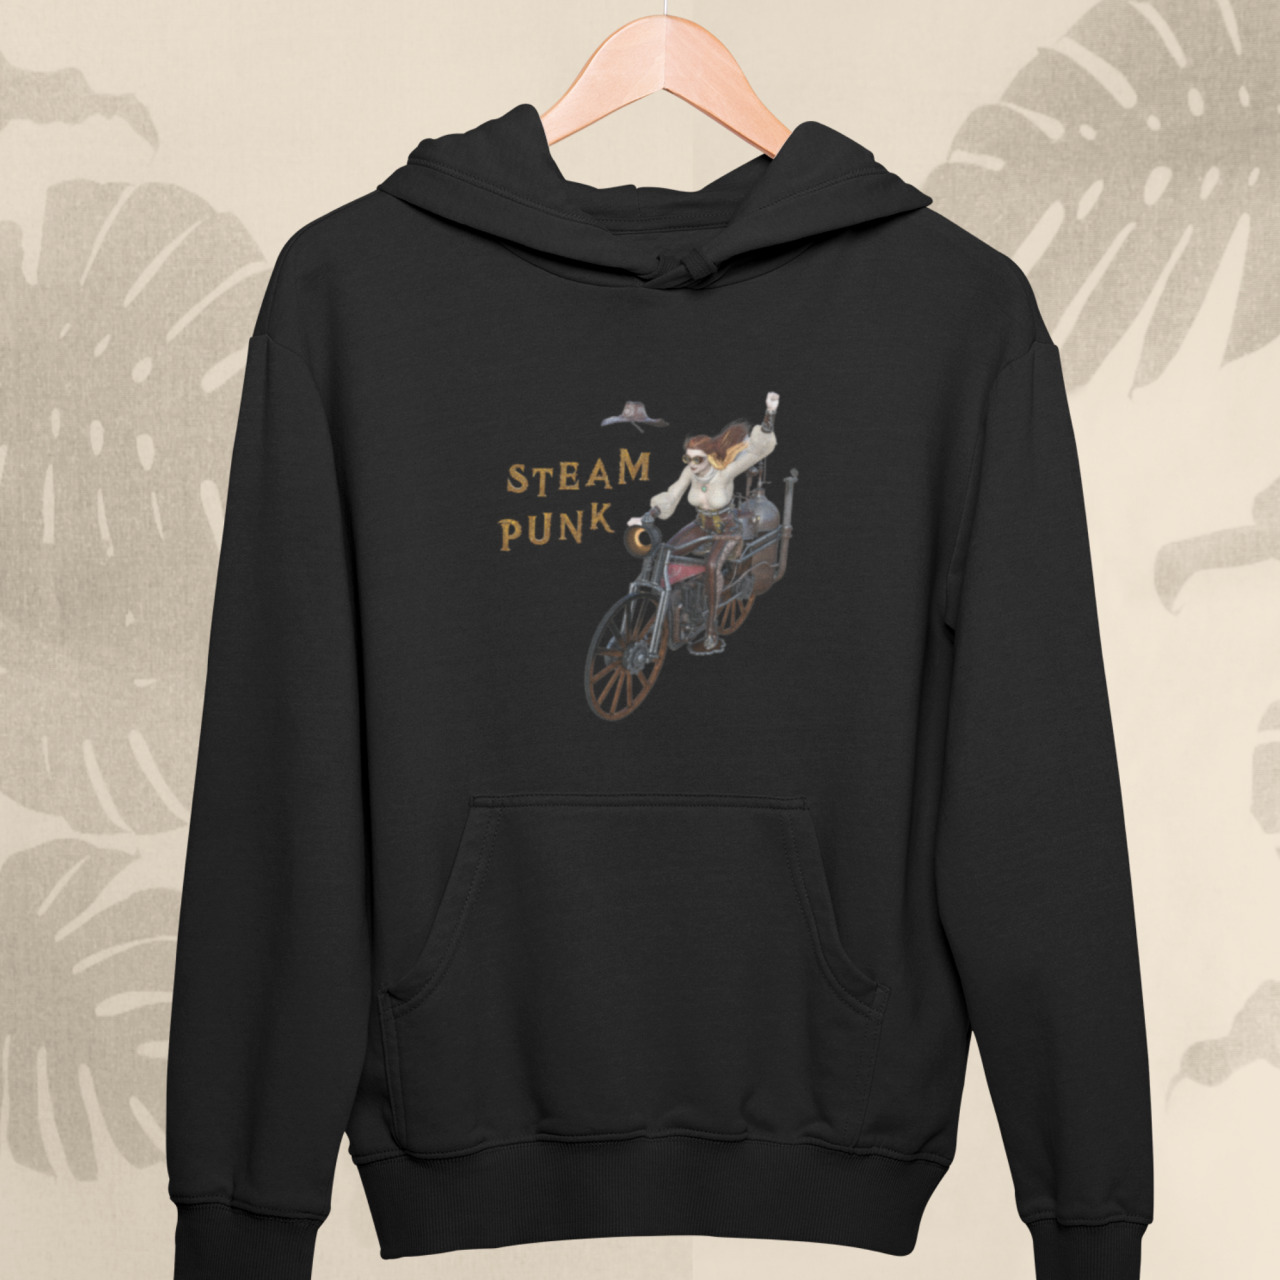                 Steampunk Lady on Motorcycle Pullover HoodieThis fun and comfy steampunk hoodie is a cool piece to add to your steam collection. Click here to grab yours today! #steampunk#motorcycle#hoodies#hoodie#ladyonbike#ladyonmotorcycle#giftsforfriends#giftsformen#giftsforwomen#christmasgifts#birthdaygifts#weddinggifts#anniversarygifts#cyberpunk#gothic#goth